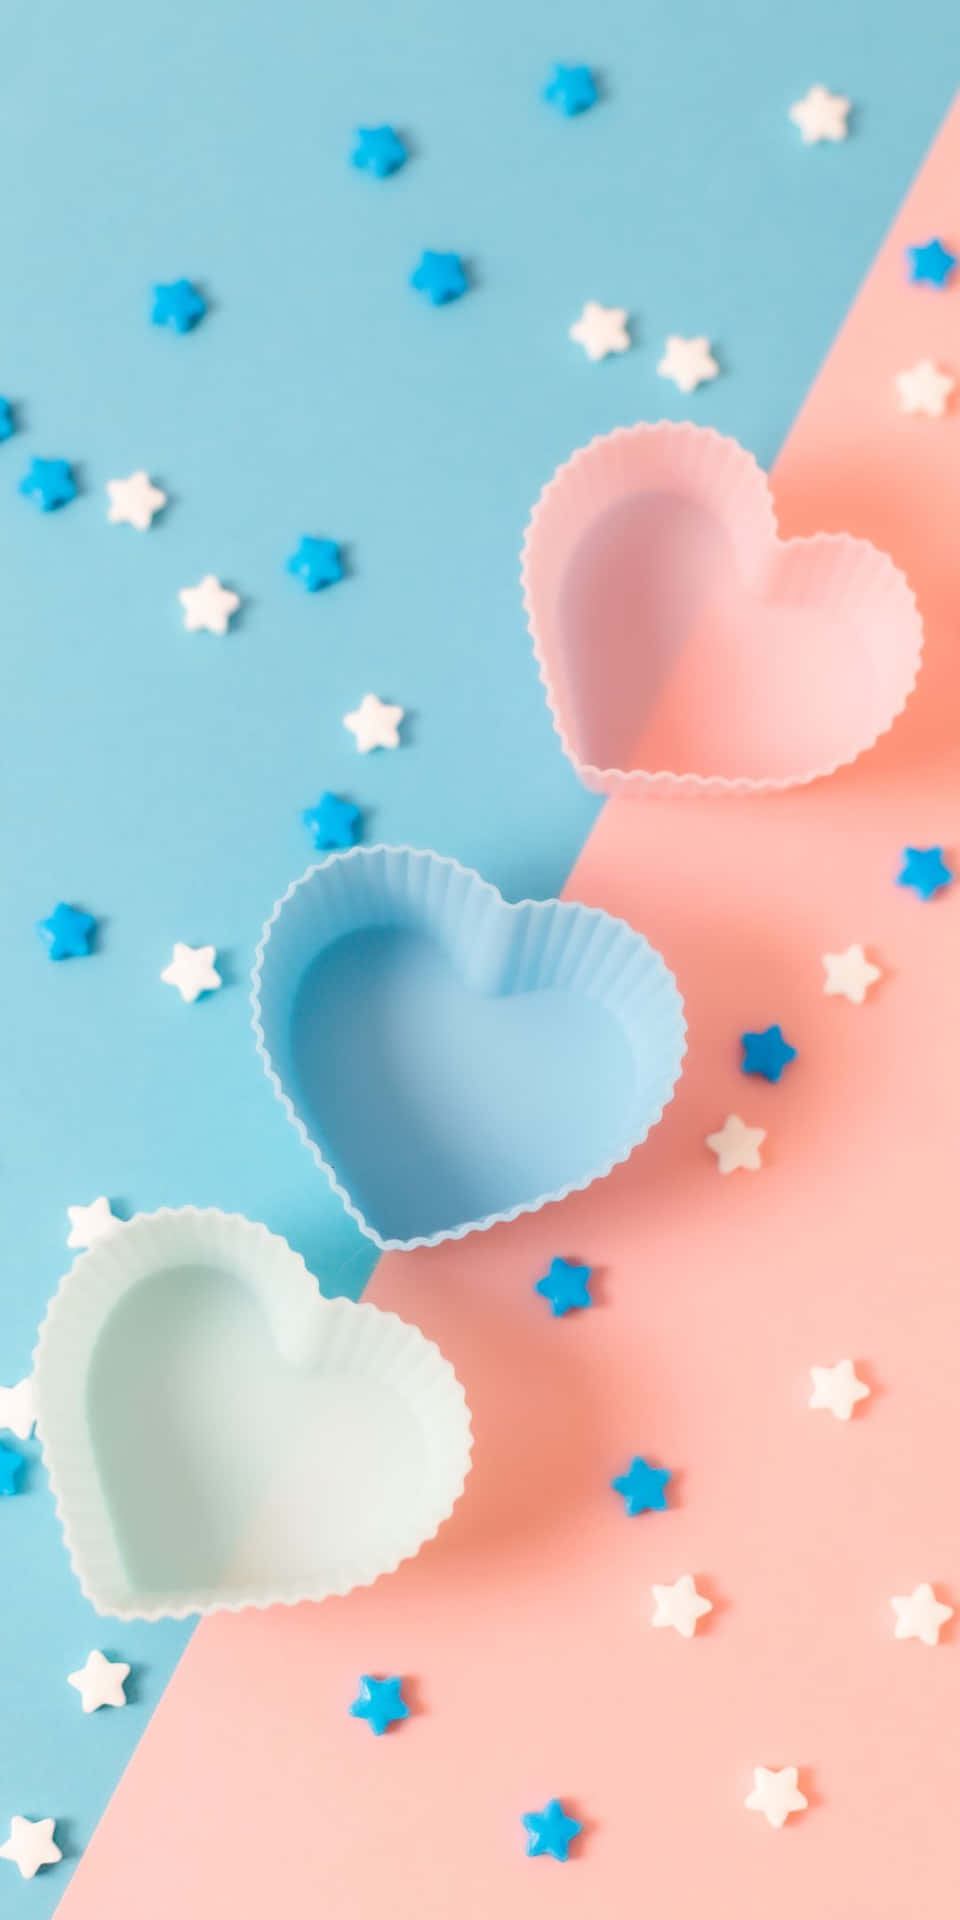 Star Sprinkles And Heart Mold Background